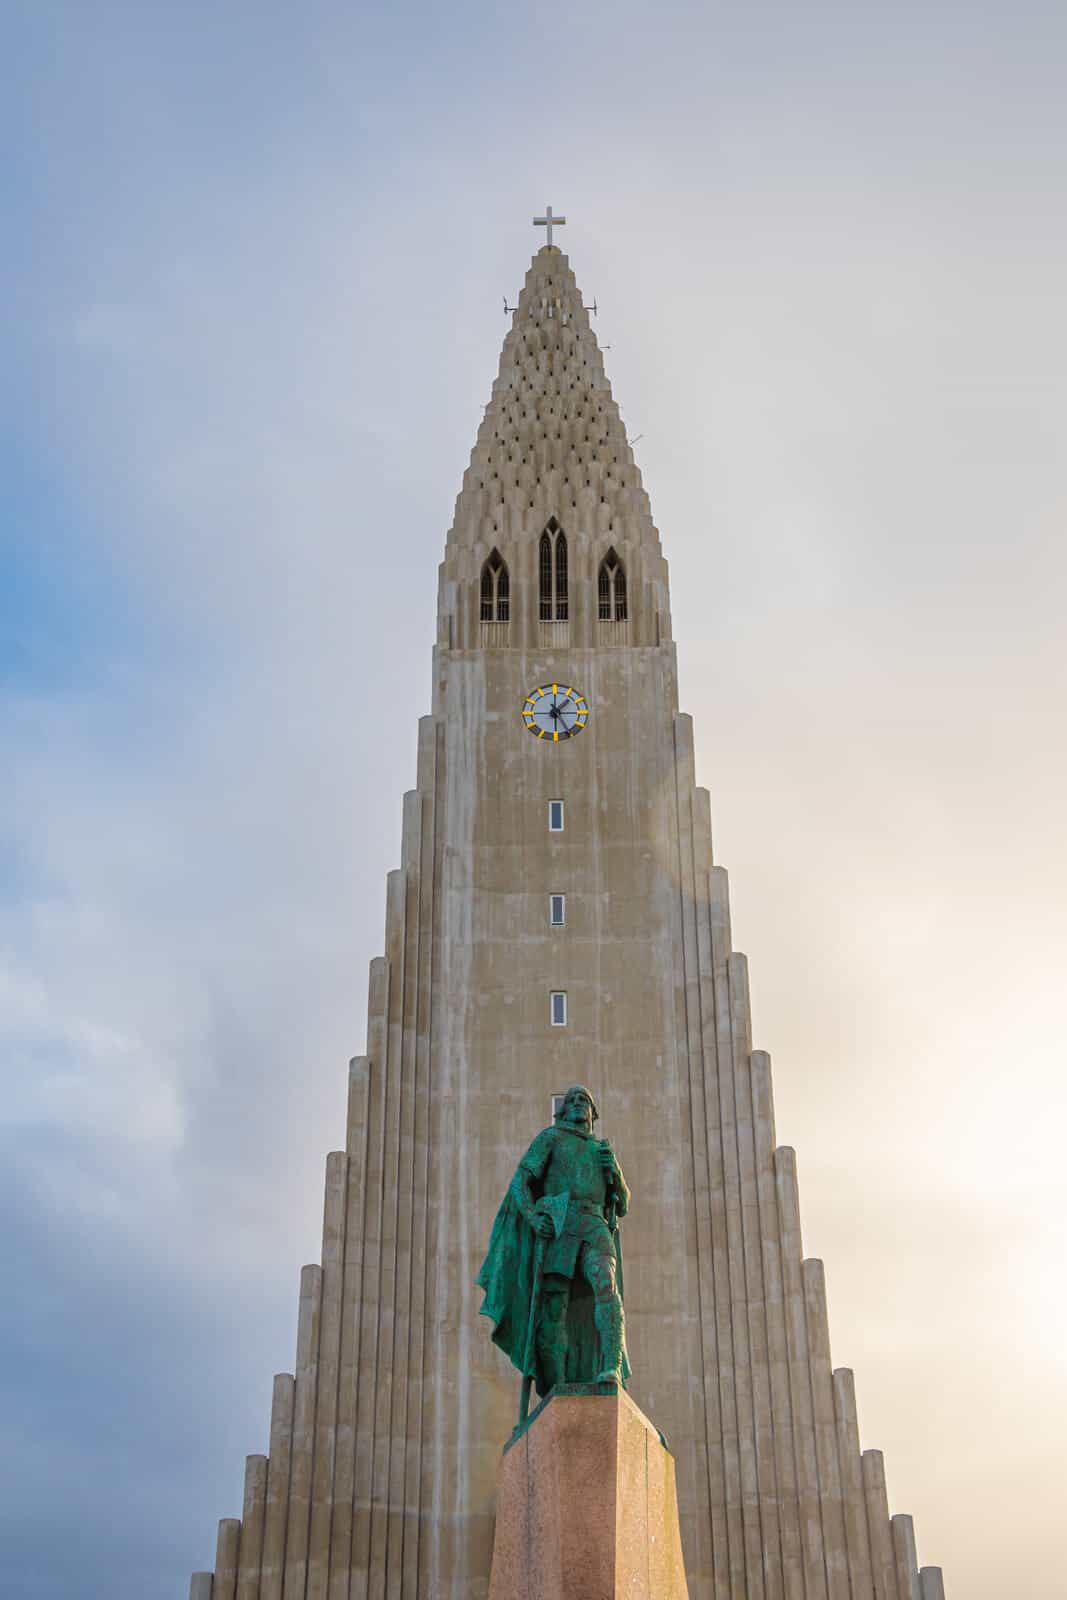 View of Reykjavik Churk during Winter with statue in the foreground